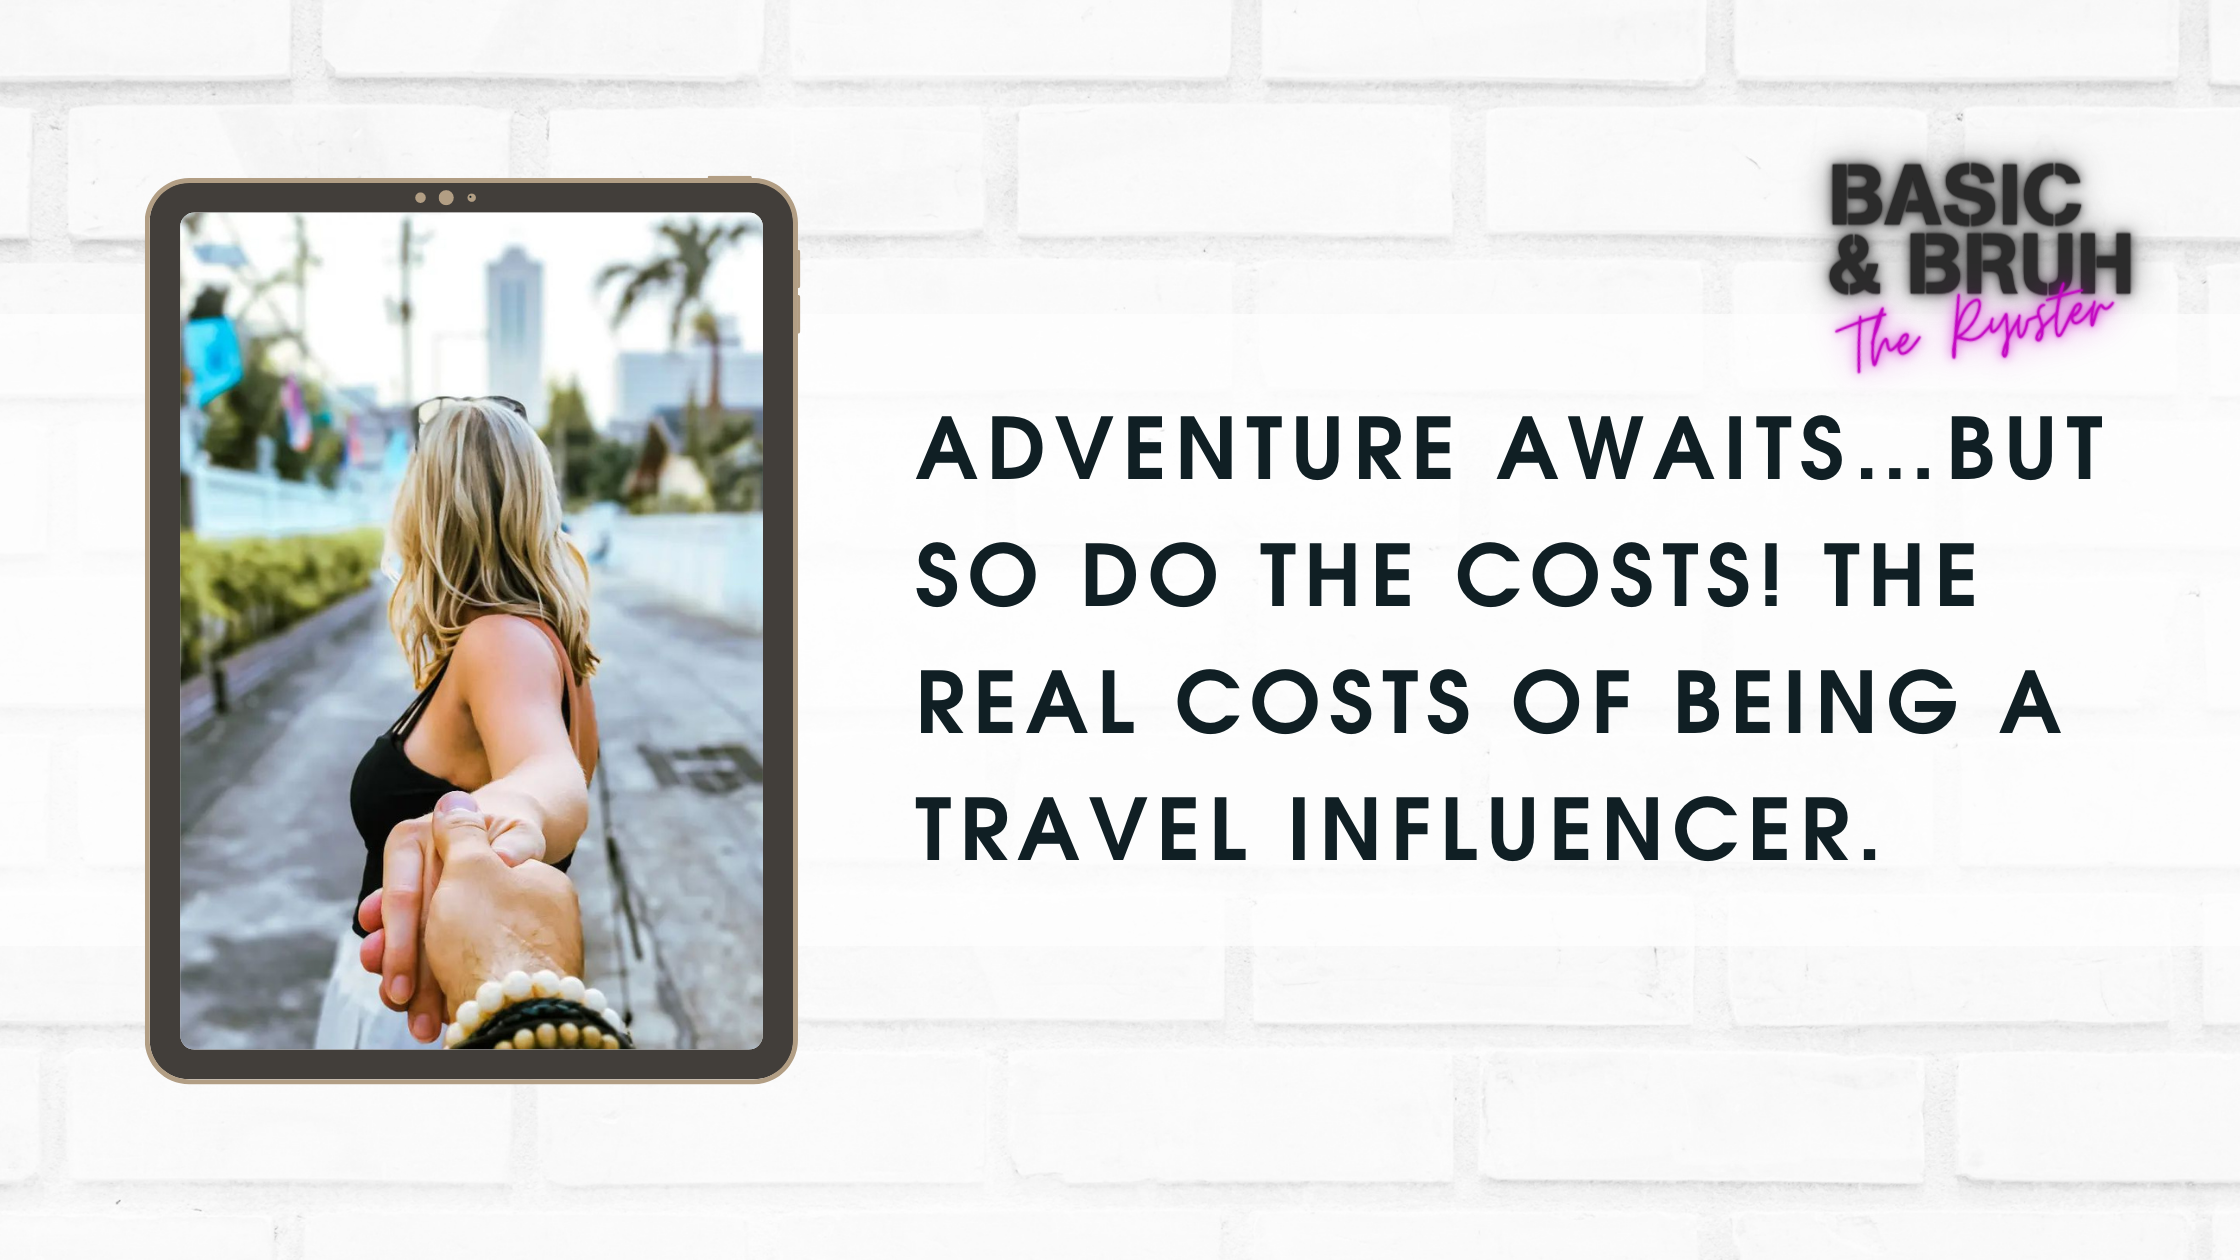 Adventure Awaits…But So Do The Costs! The Real Costs of Being a Travel Influencer.